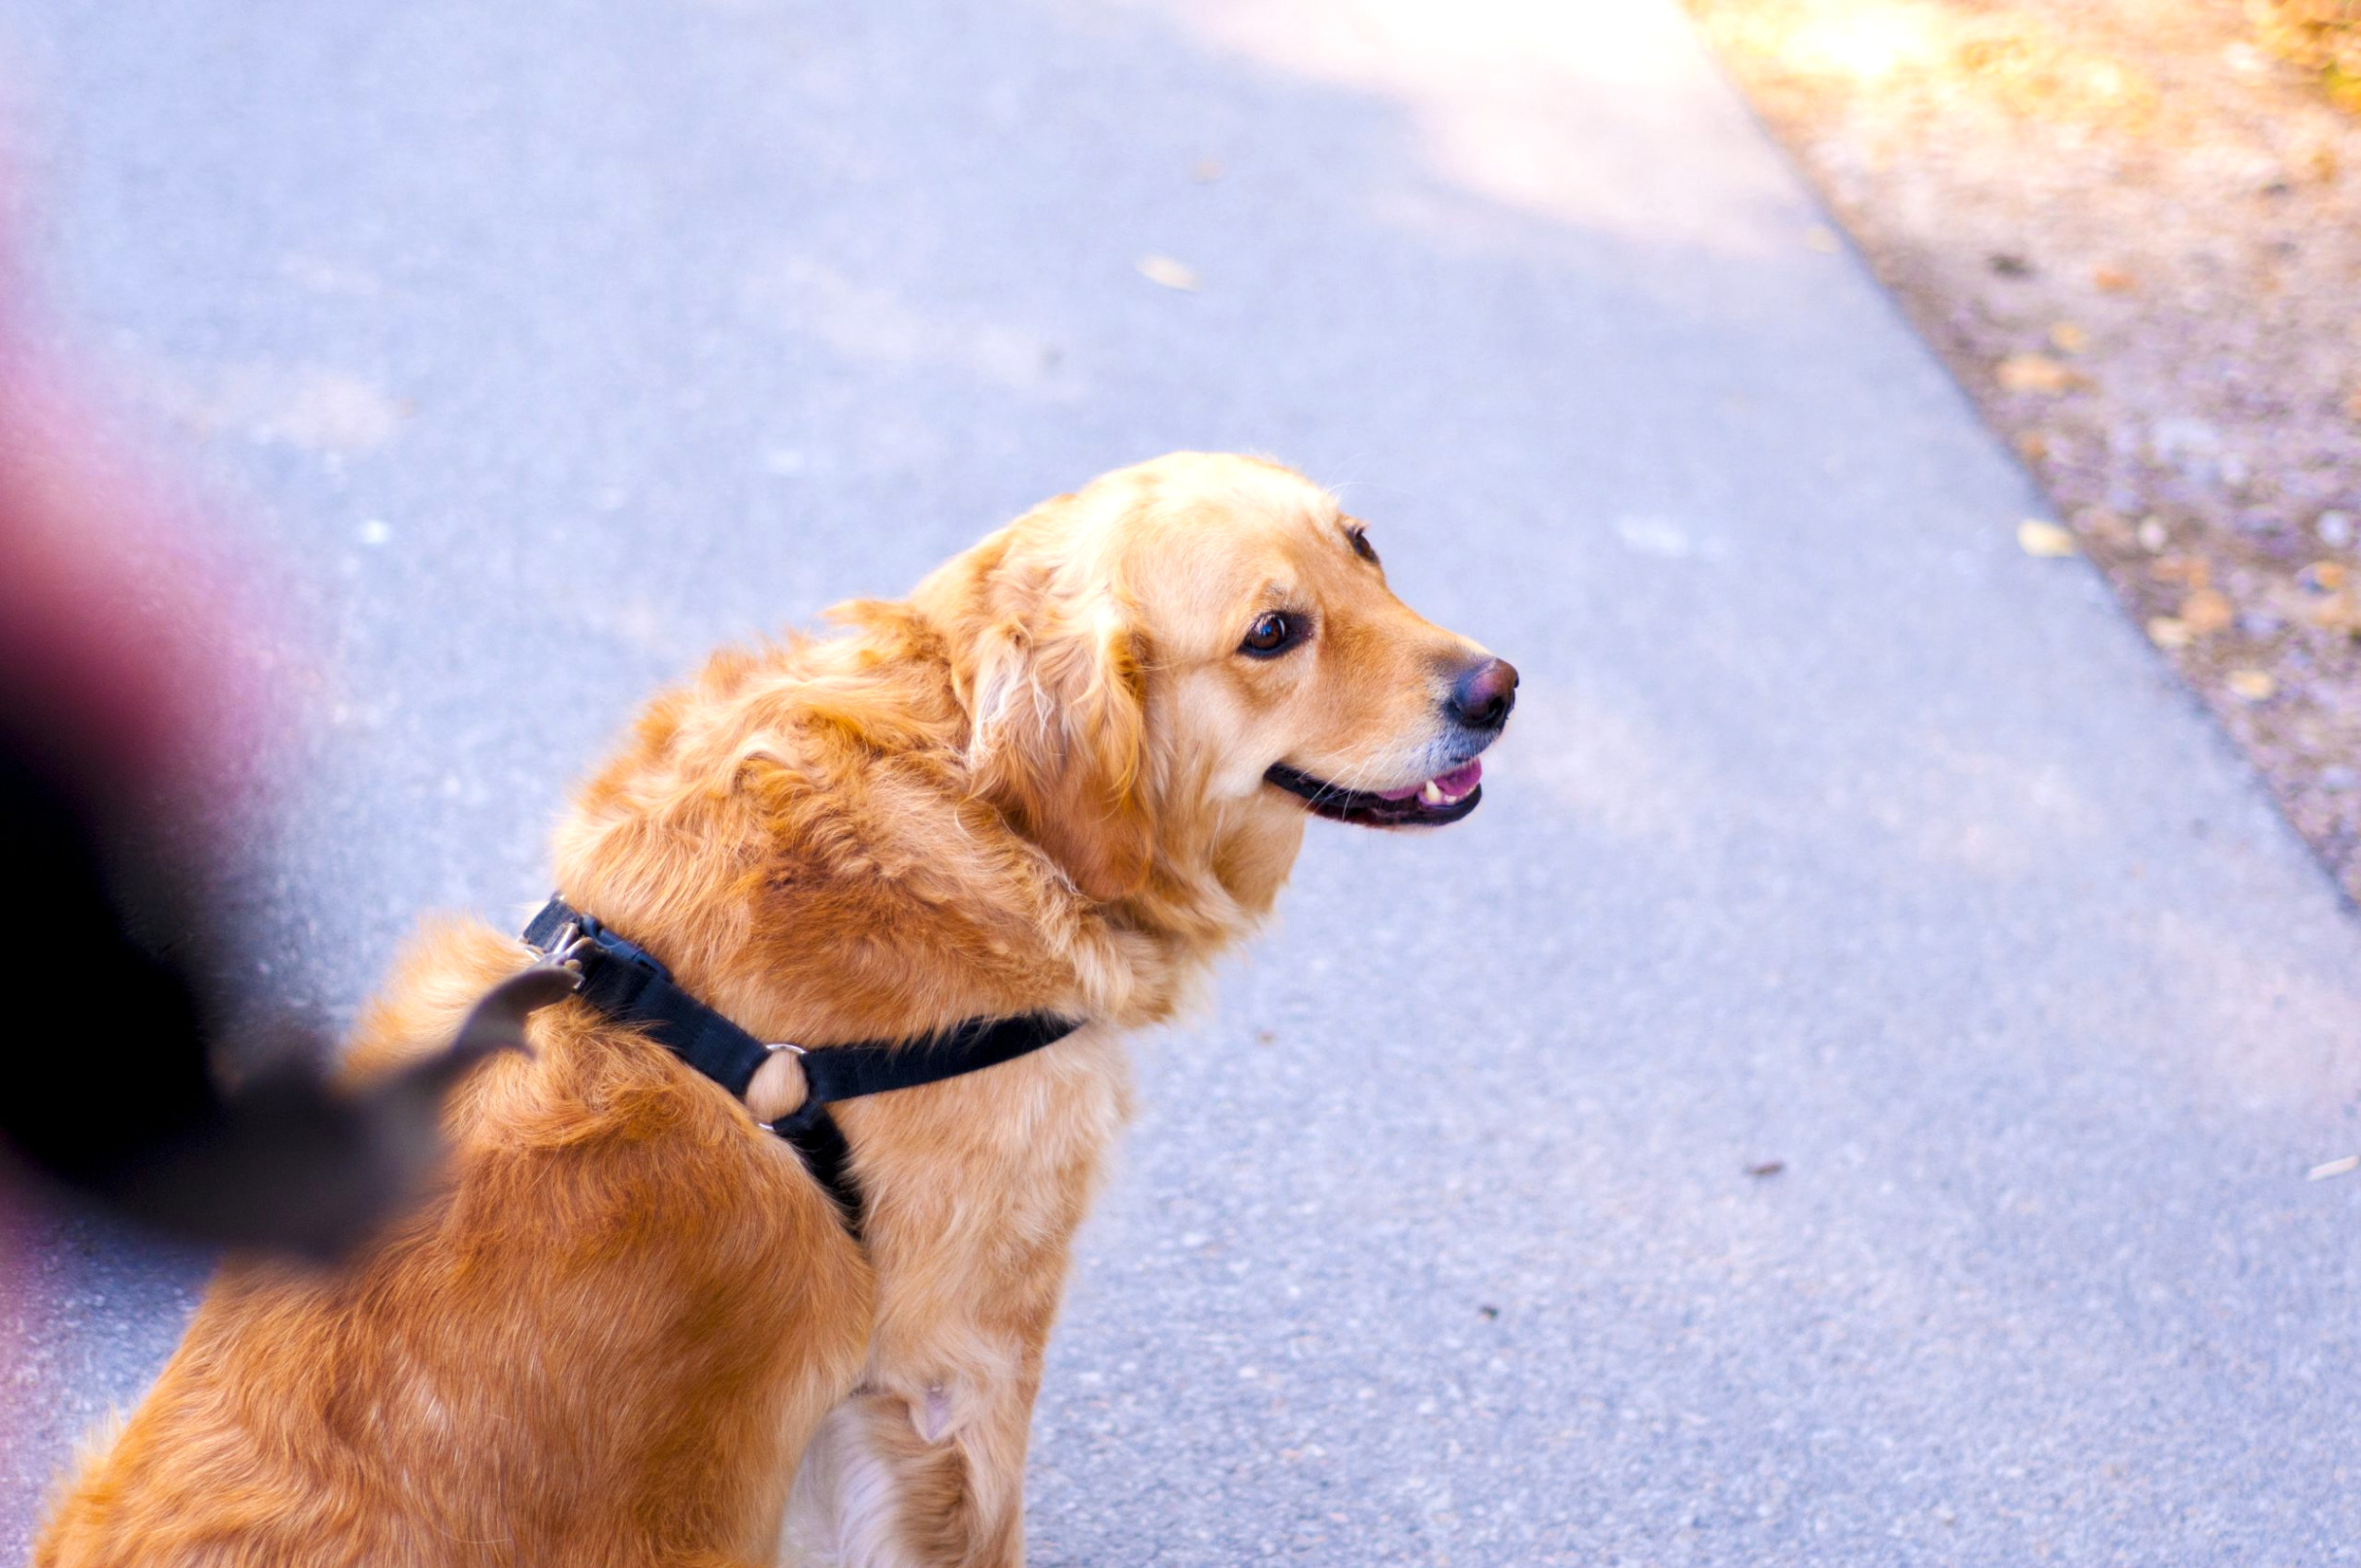 Personil Injury Lawyer In Wyoming Wv Dans 12 Things You Might Not Know About Guide Dogs - orcam